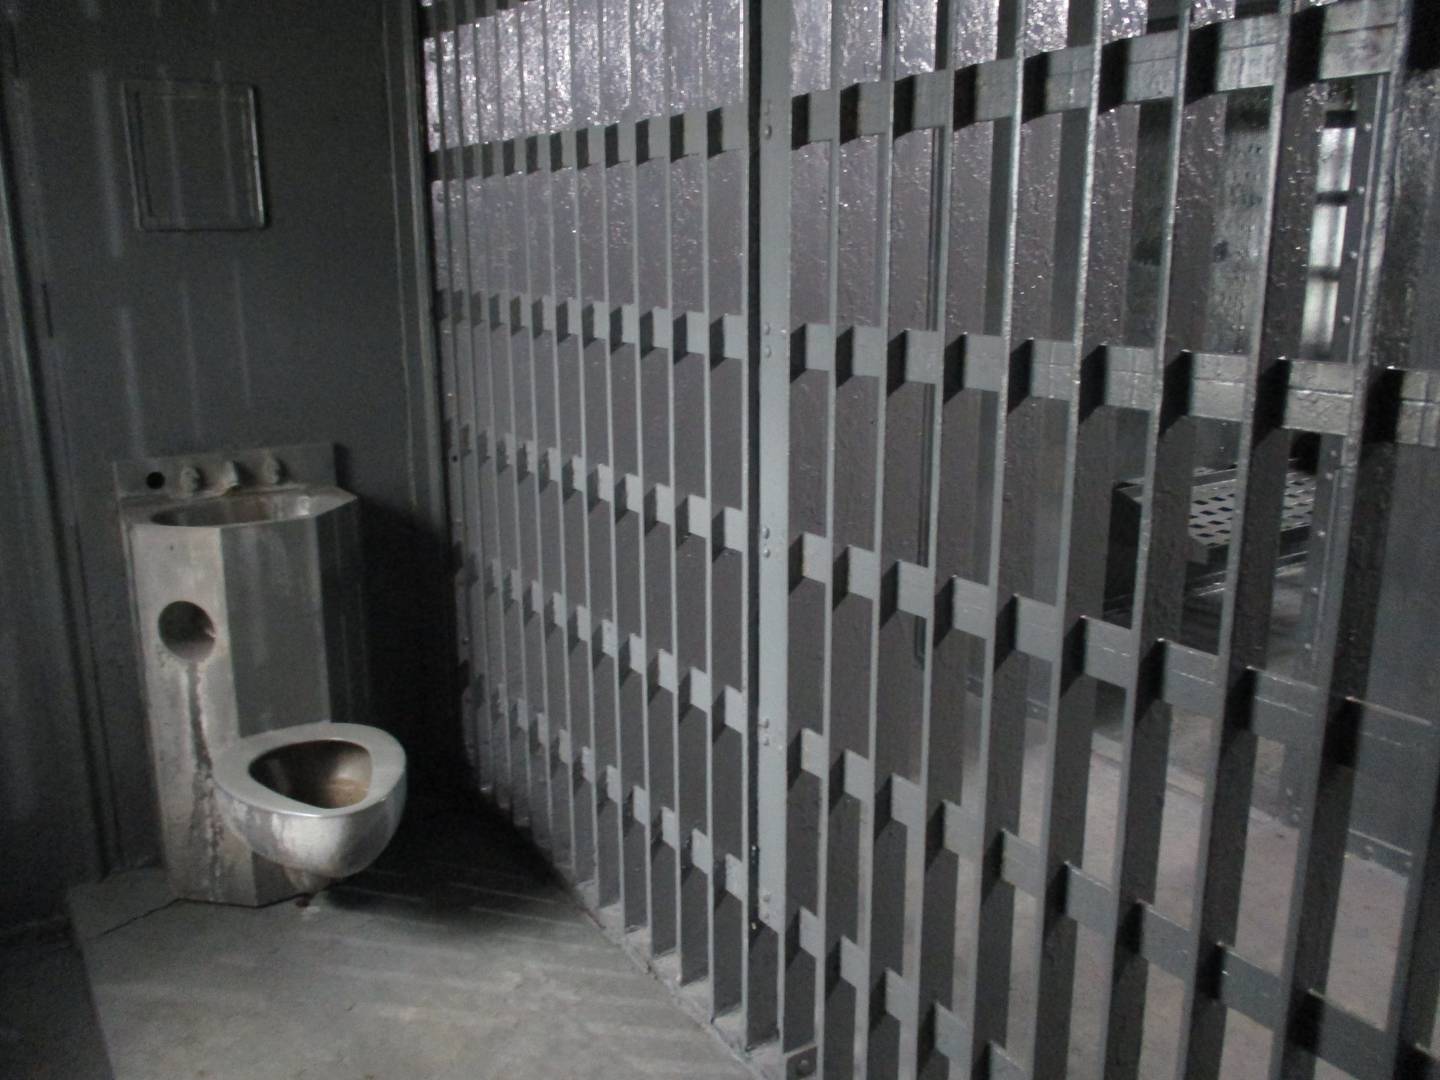 There was very little privacy at the old Kendall County jail. (Mark Foster -- mfoster@shawmedia.com)